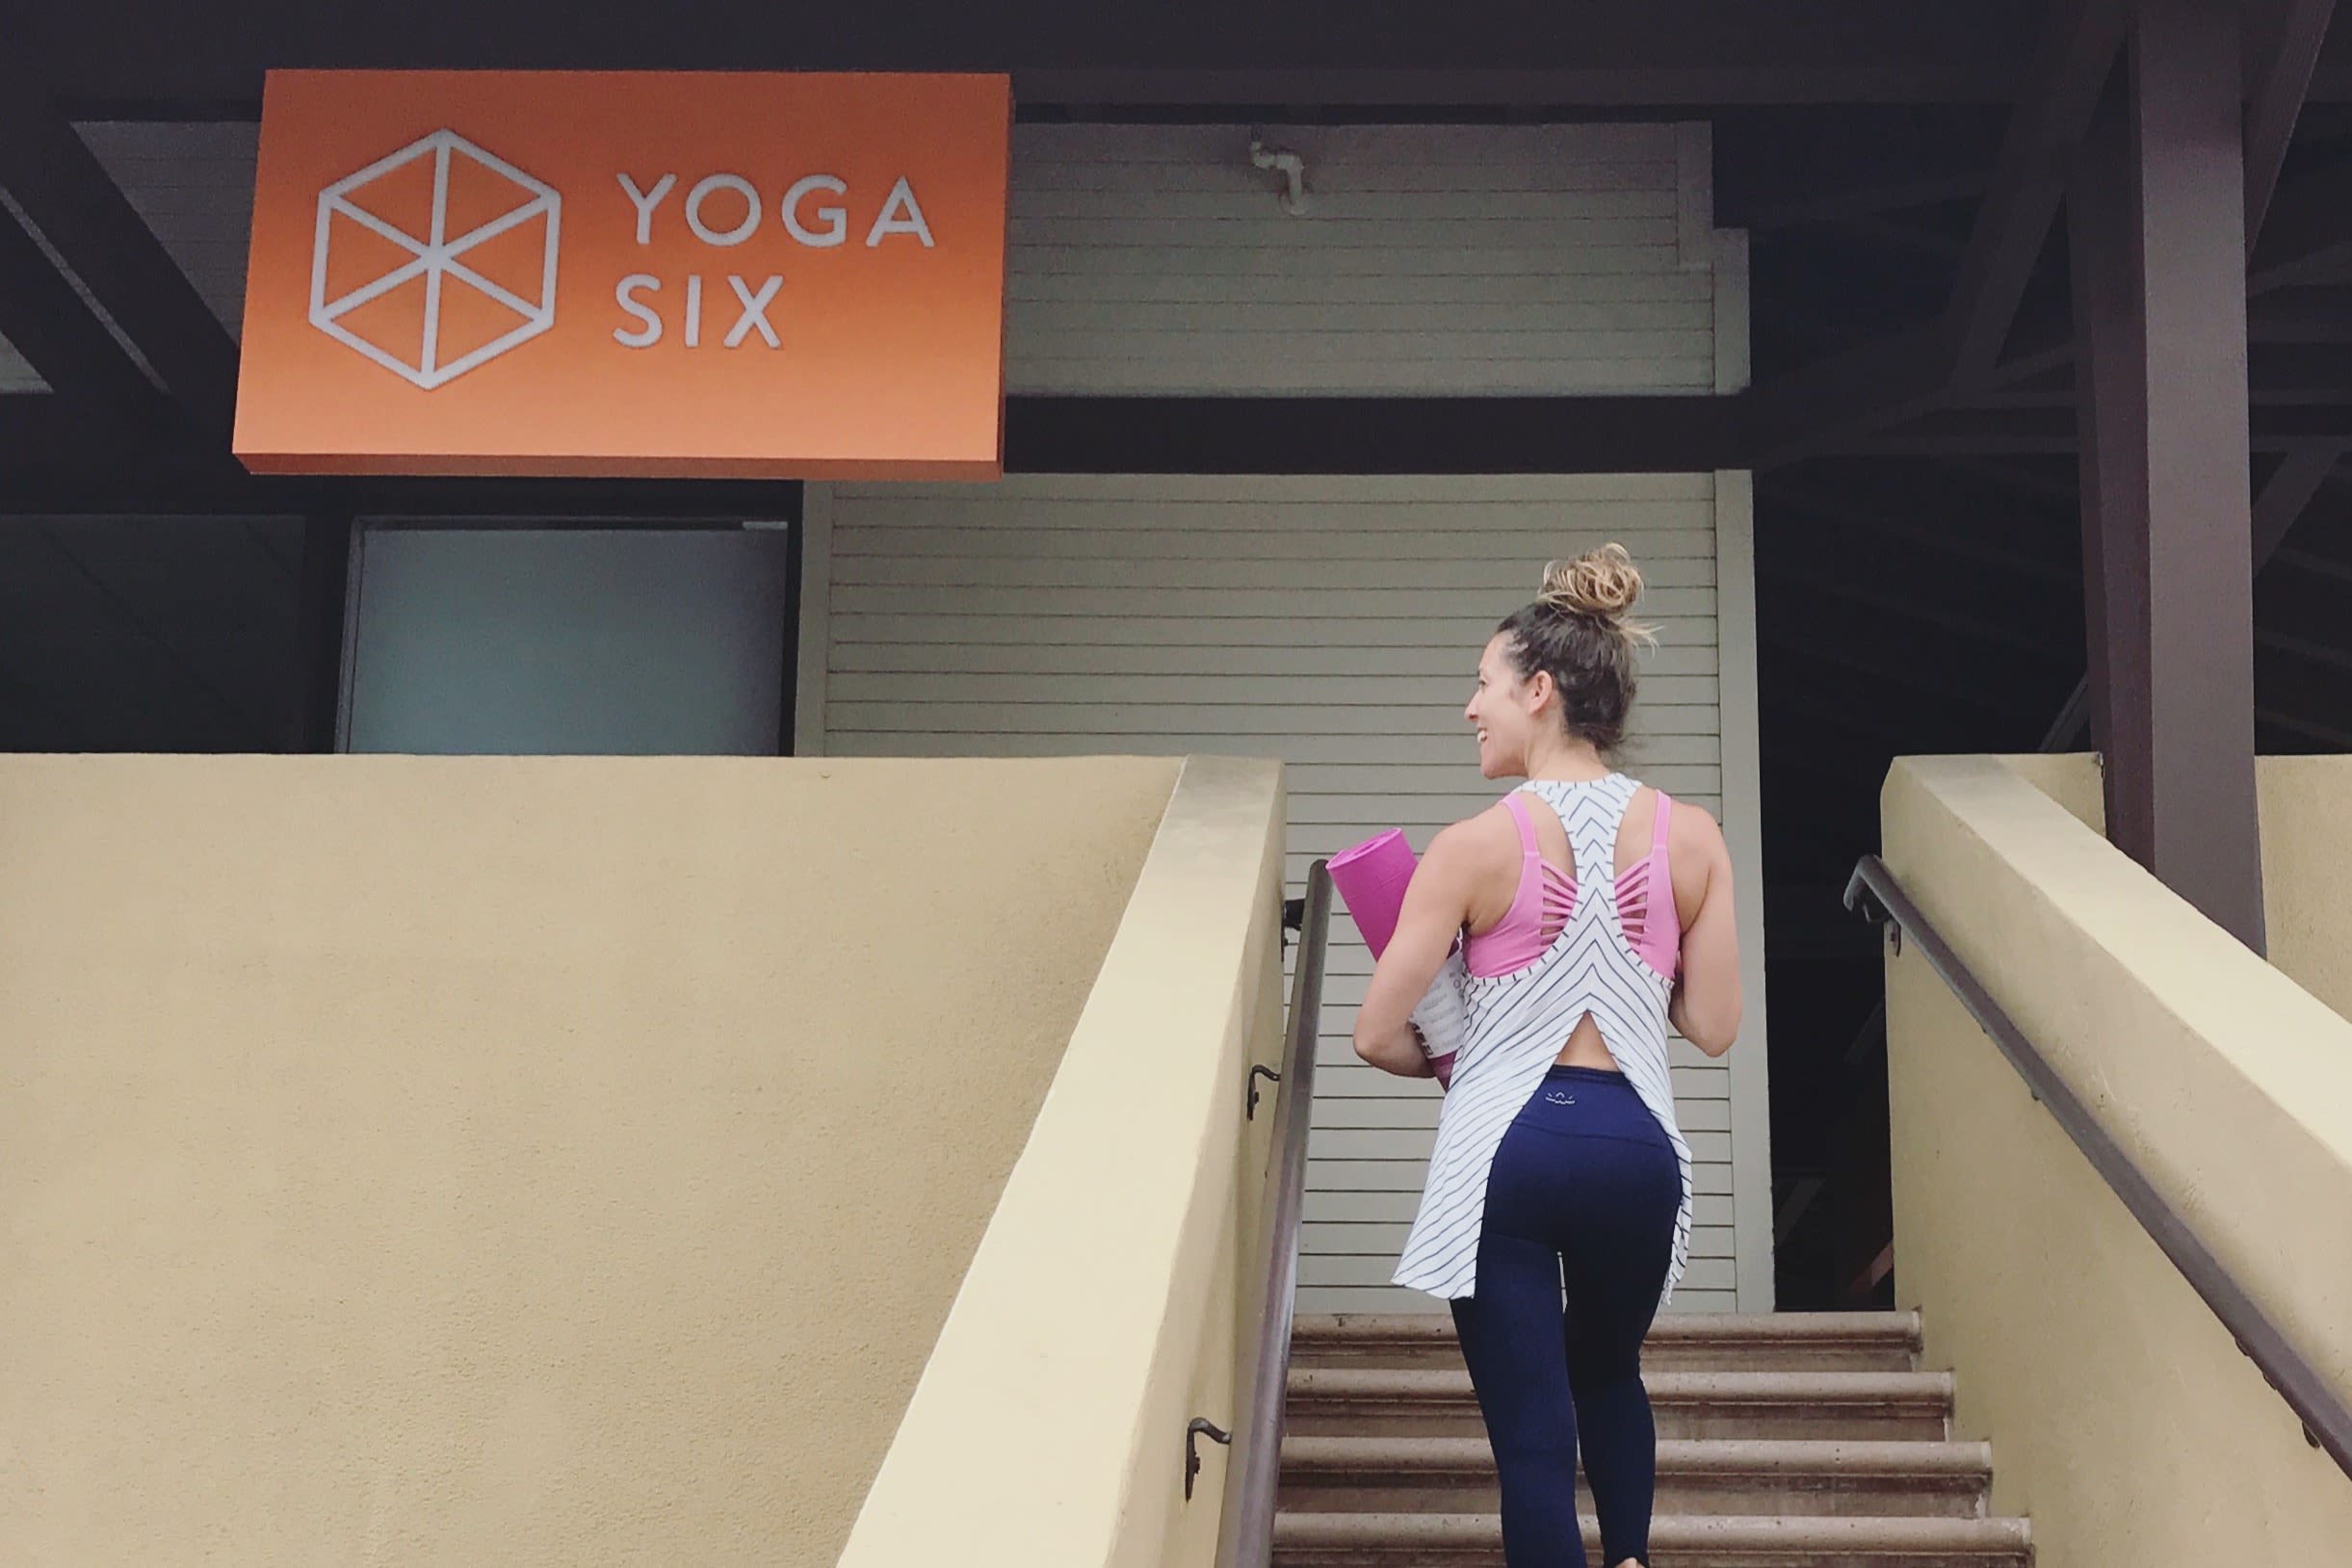 Y6 Slow Flow Studio 1 at YogaSix - Solana Beach: Read Reviews and Book  Classes on ClassPass